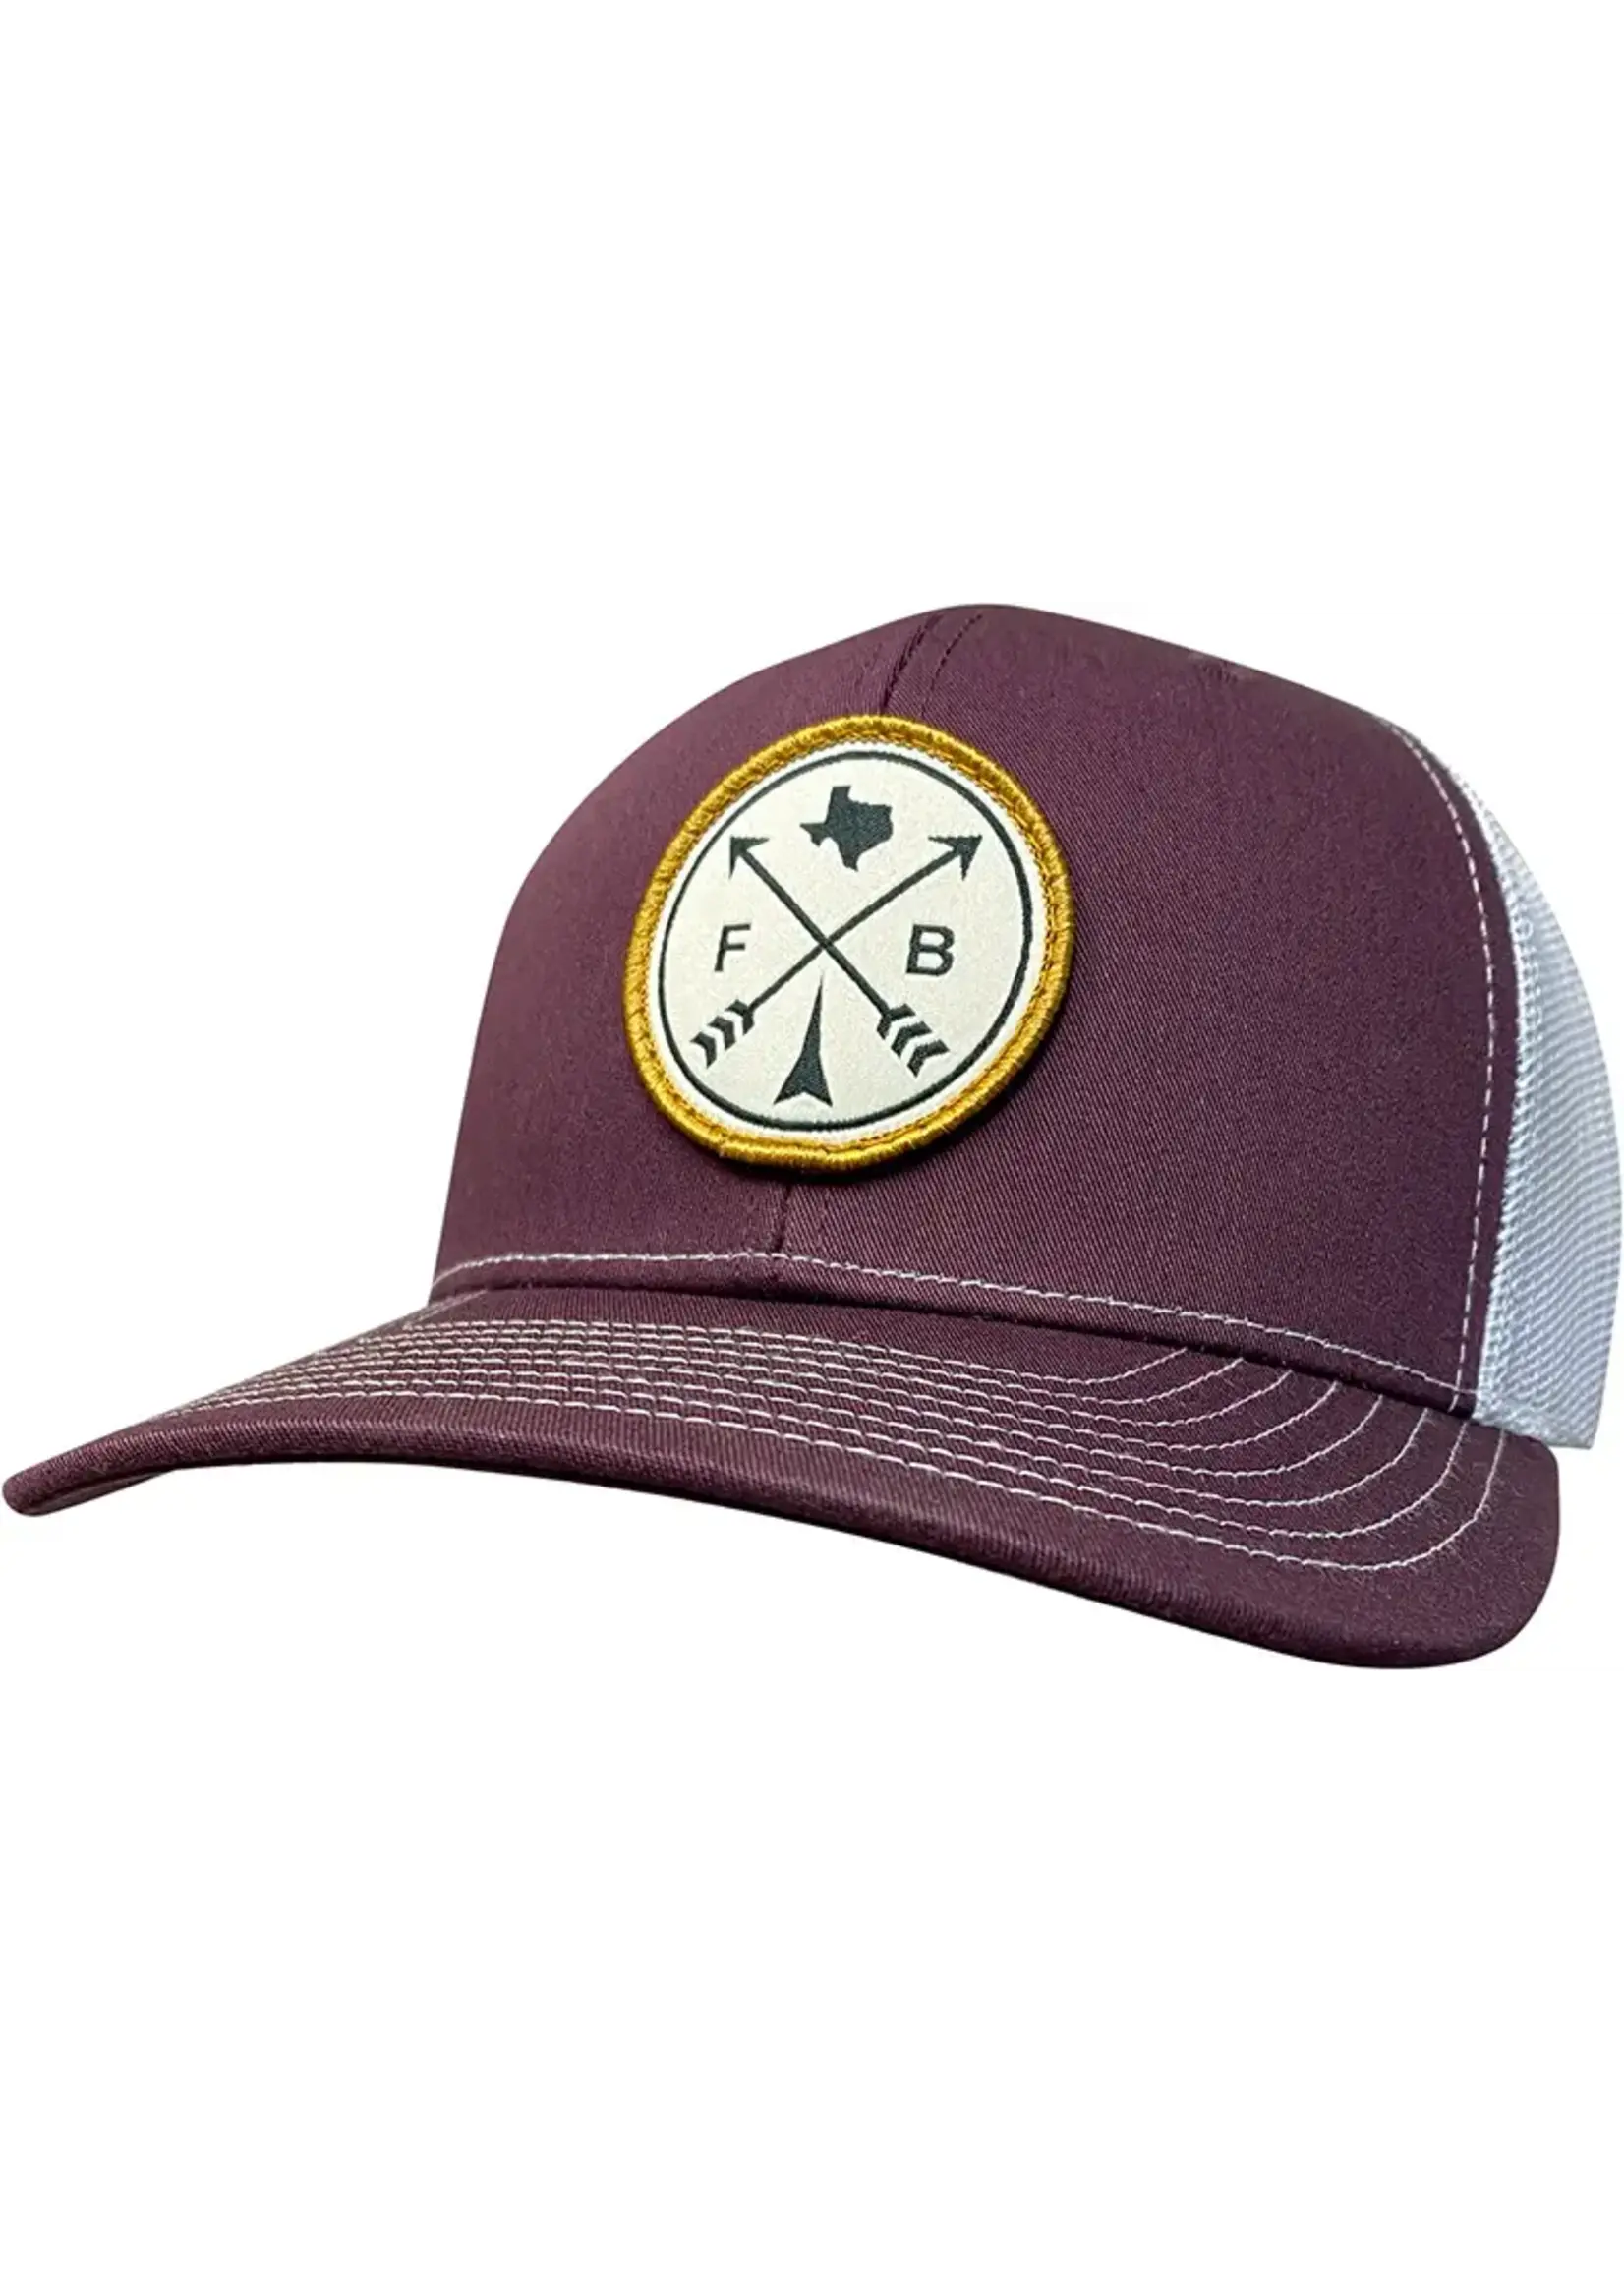 Fast Back Fast Back Hat - Maroon Criss Cross Patch